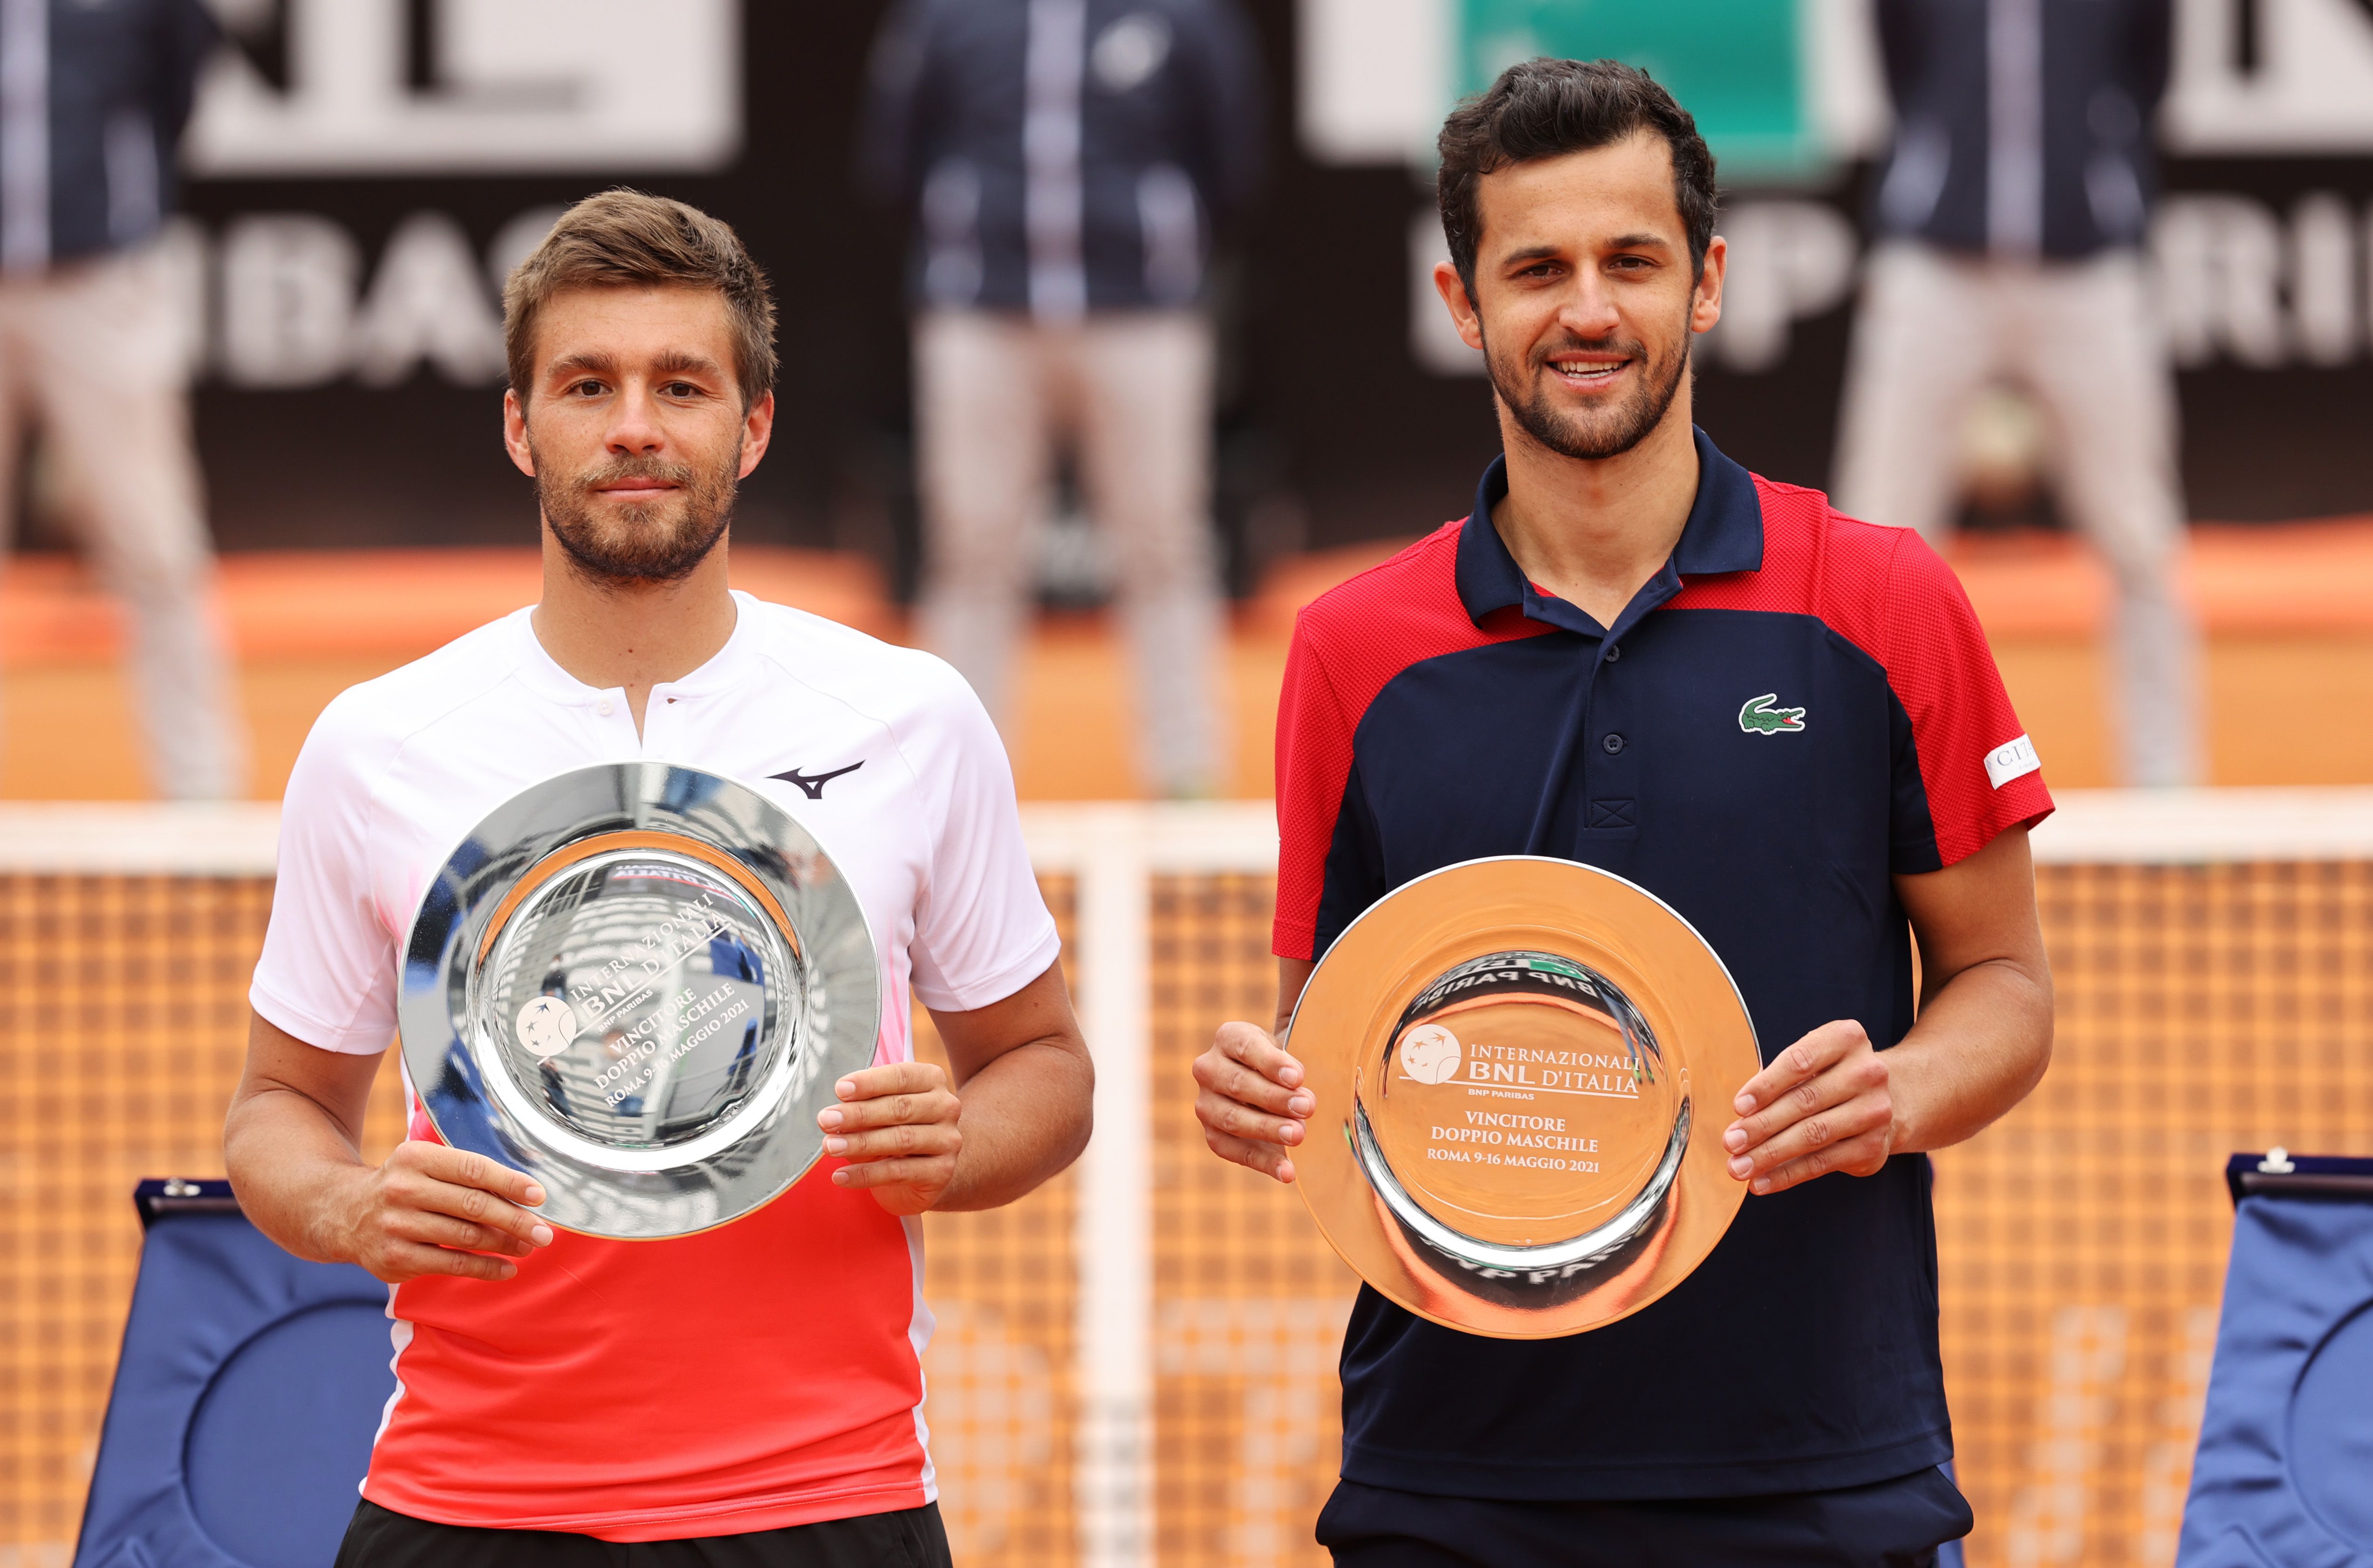 Doubles Preview Top seeds Pavic and Mektic look to capture their 7th title of the season in Paris